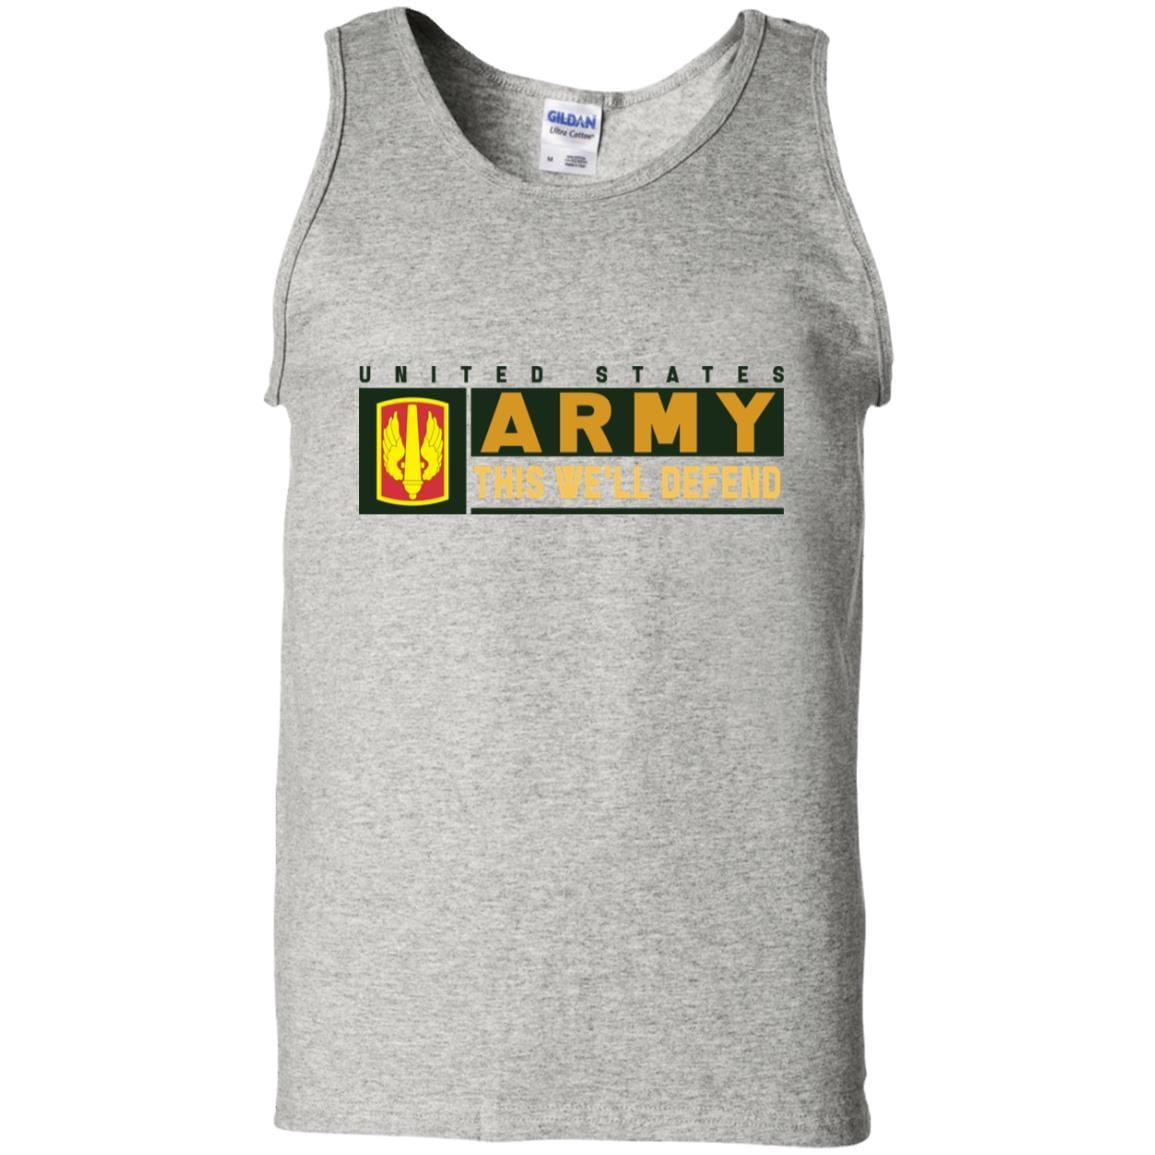 US Army 18TH FIELD ARTILLERY BRIGADE- This We'll Defend T-Shirt On Front For Men-TShirt-Army-Veterans Nation